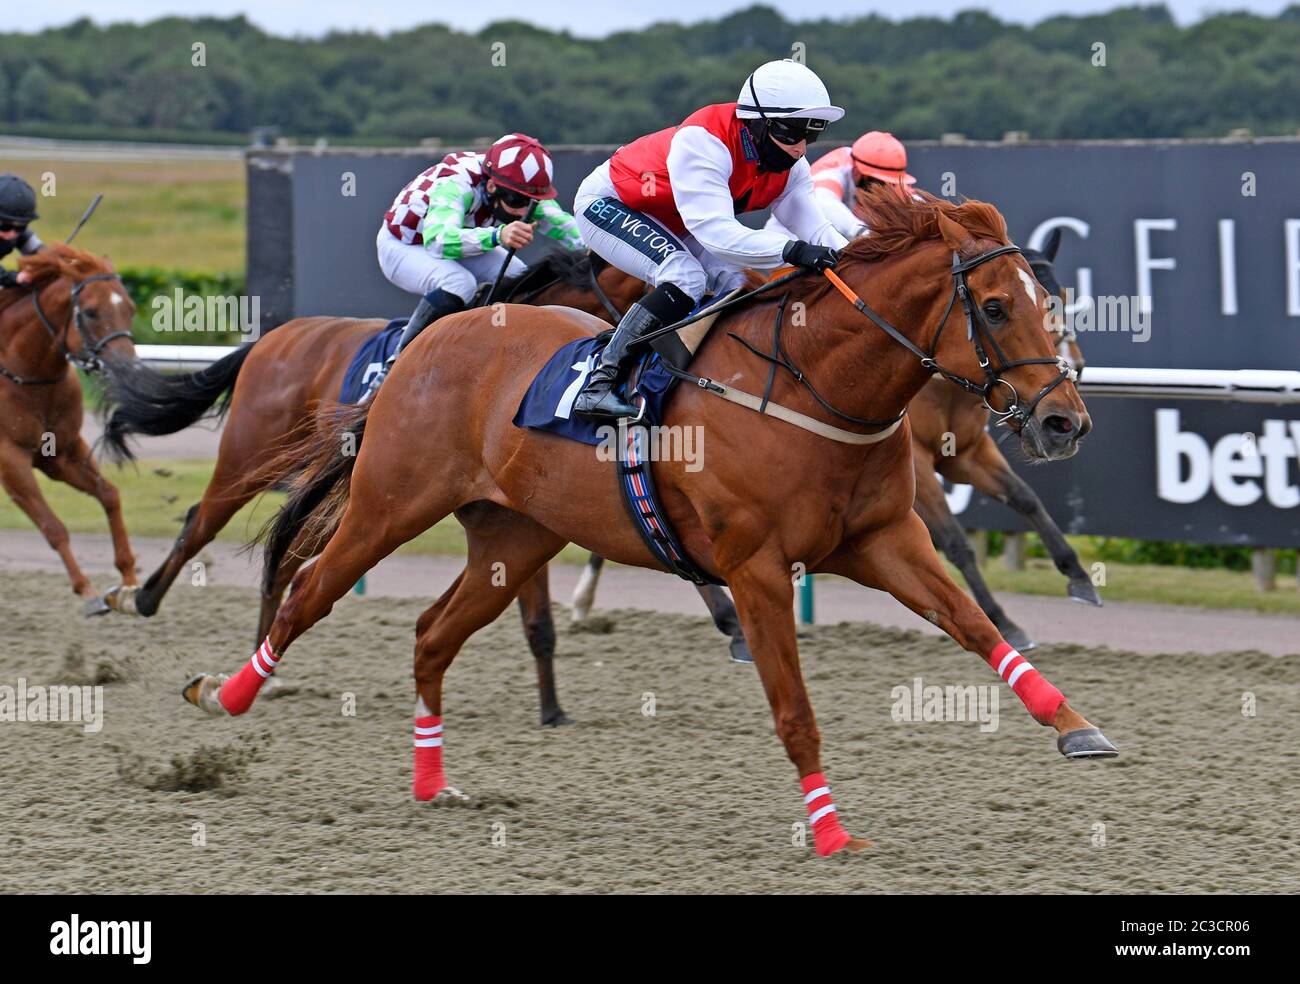 Just Glamorous ridden by jockey Nicola Currie wins the Play 4 To Score at Betway Handicap at Lingfield Park Racecourse. Stock Photo